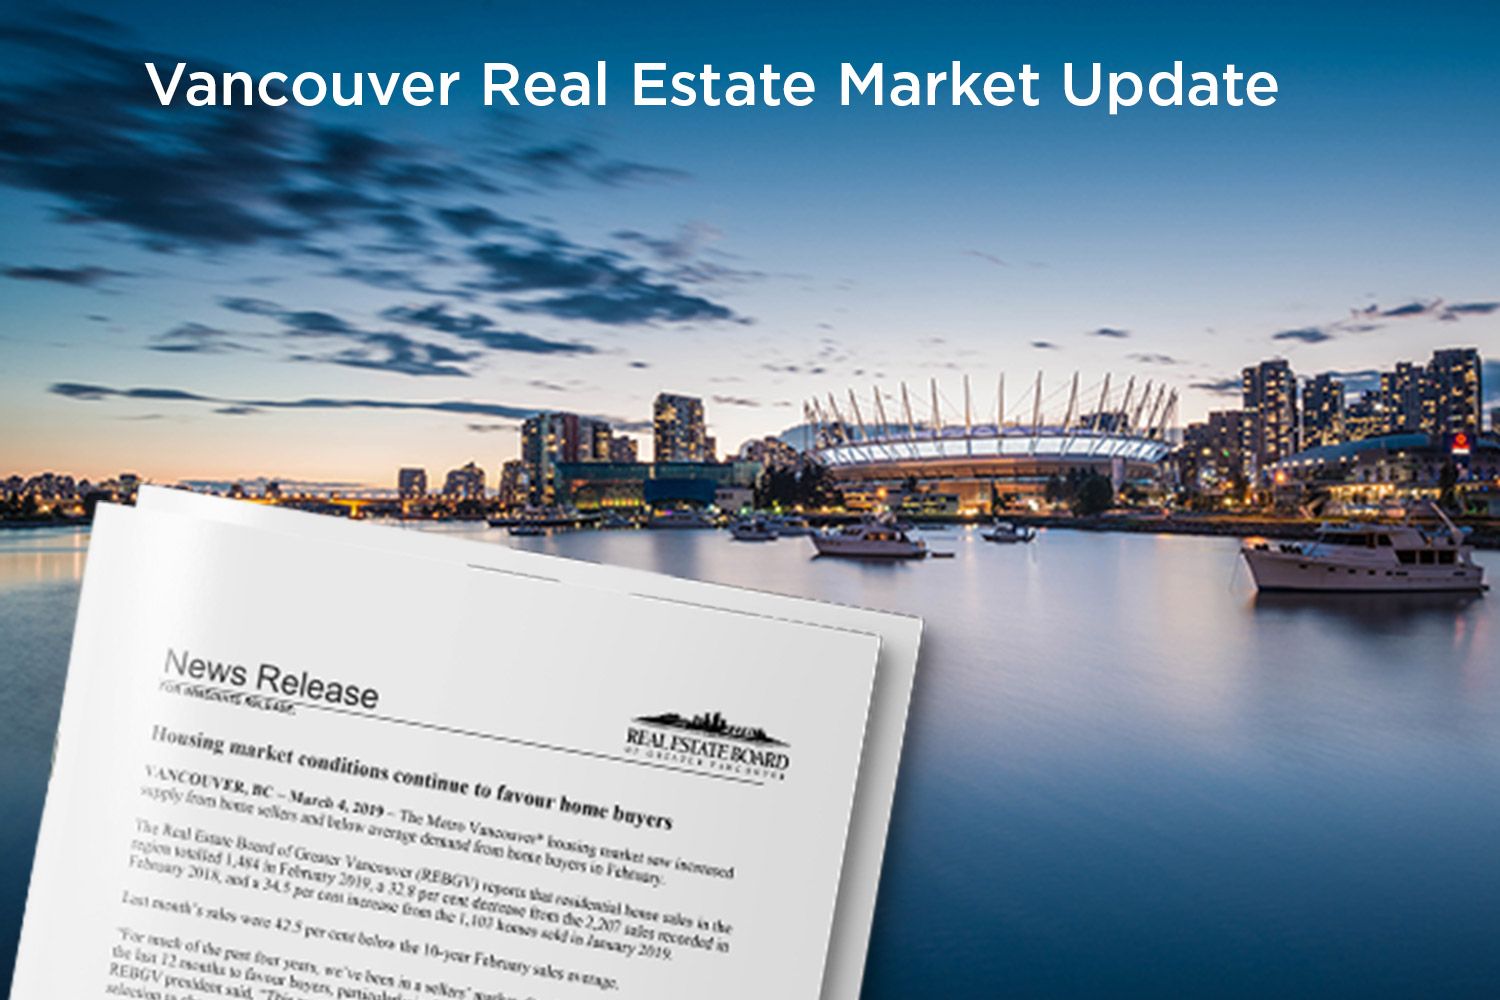 Housing market conditions continue to favour home buyers